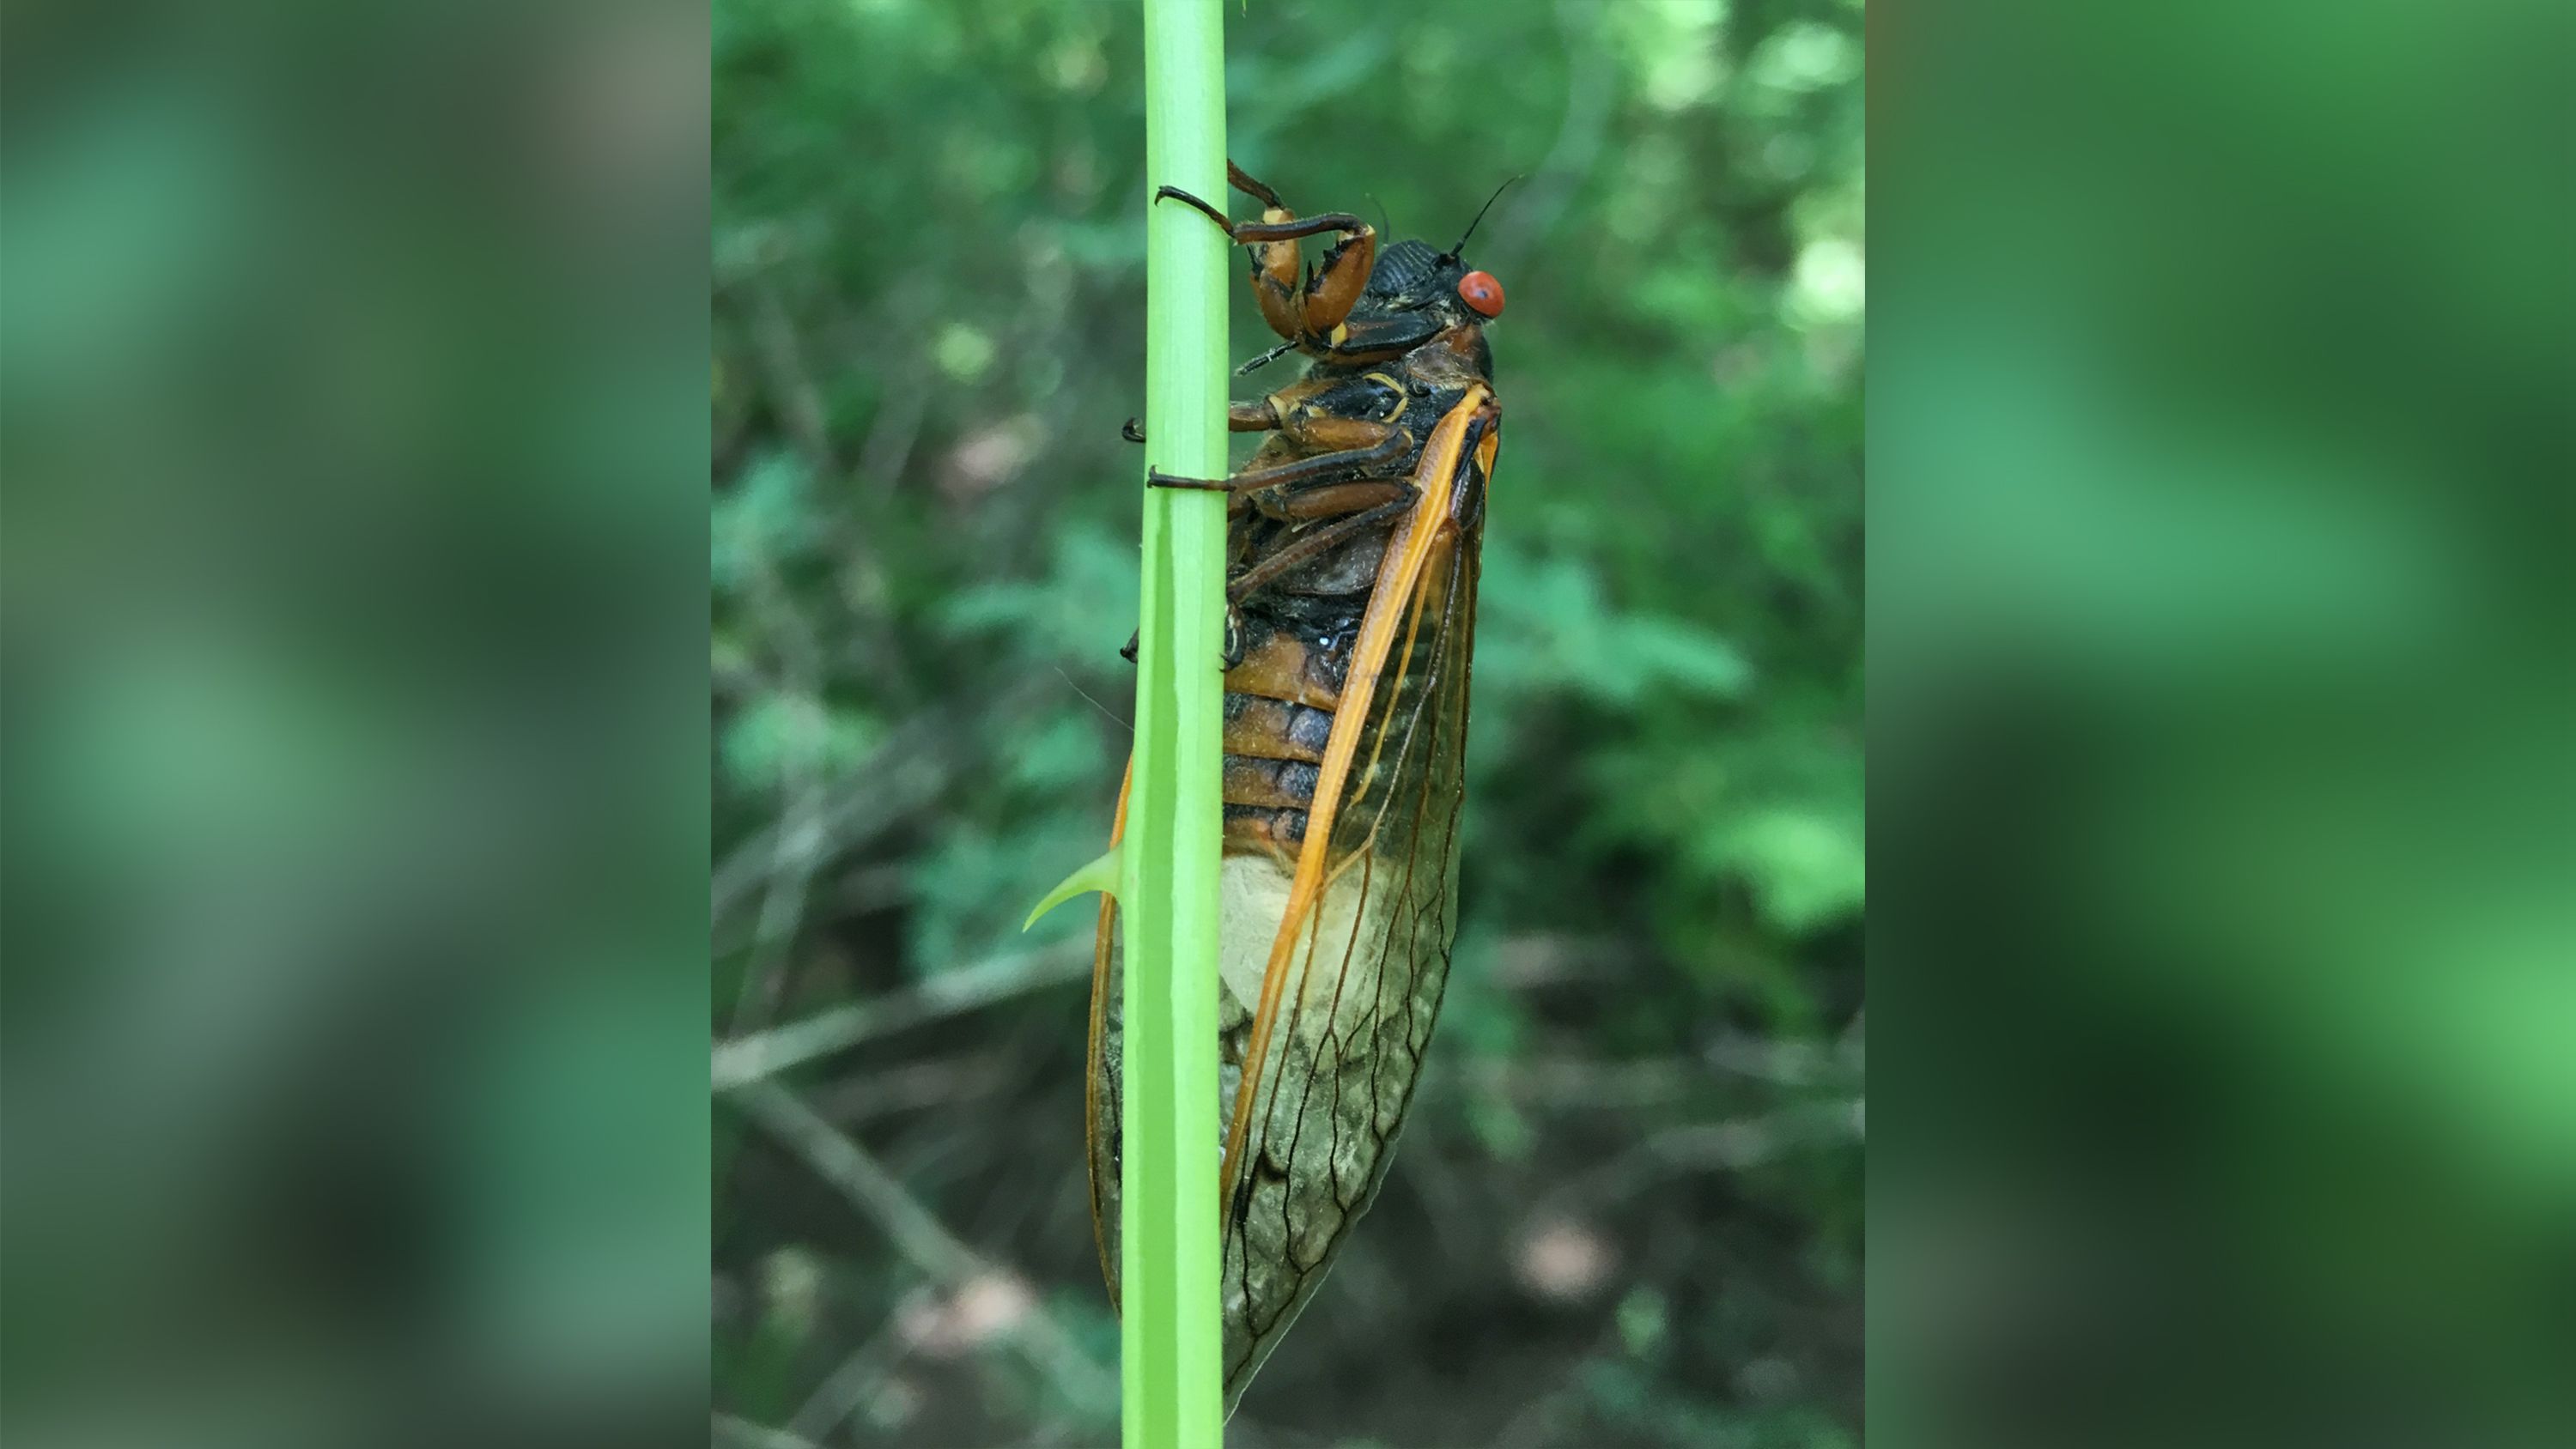 Zombie cicadas' under the influence of a mind controlling fungus have  returned to West Virginia | CNN